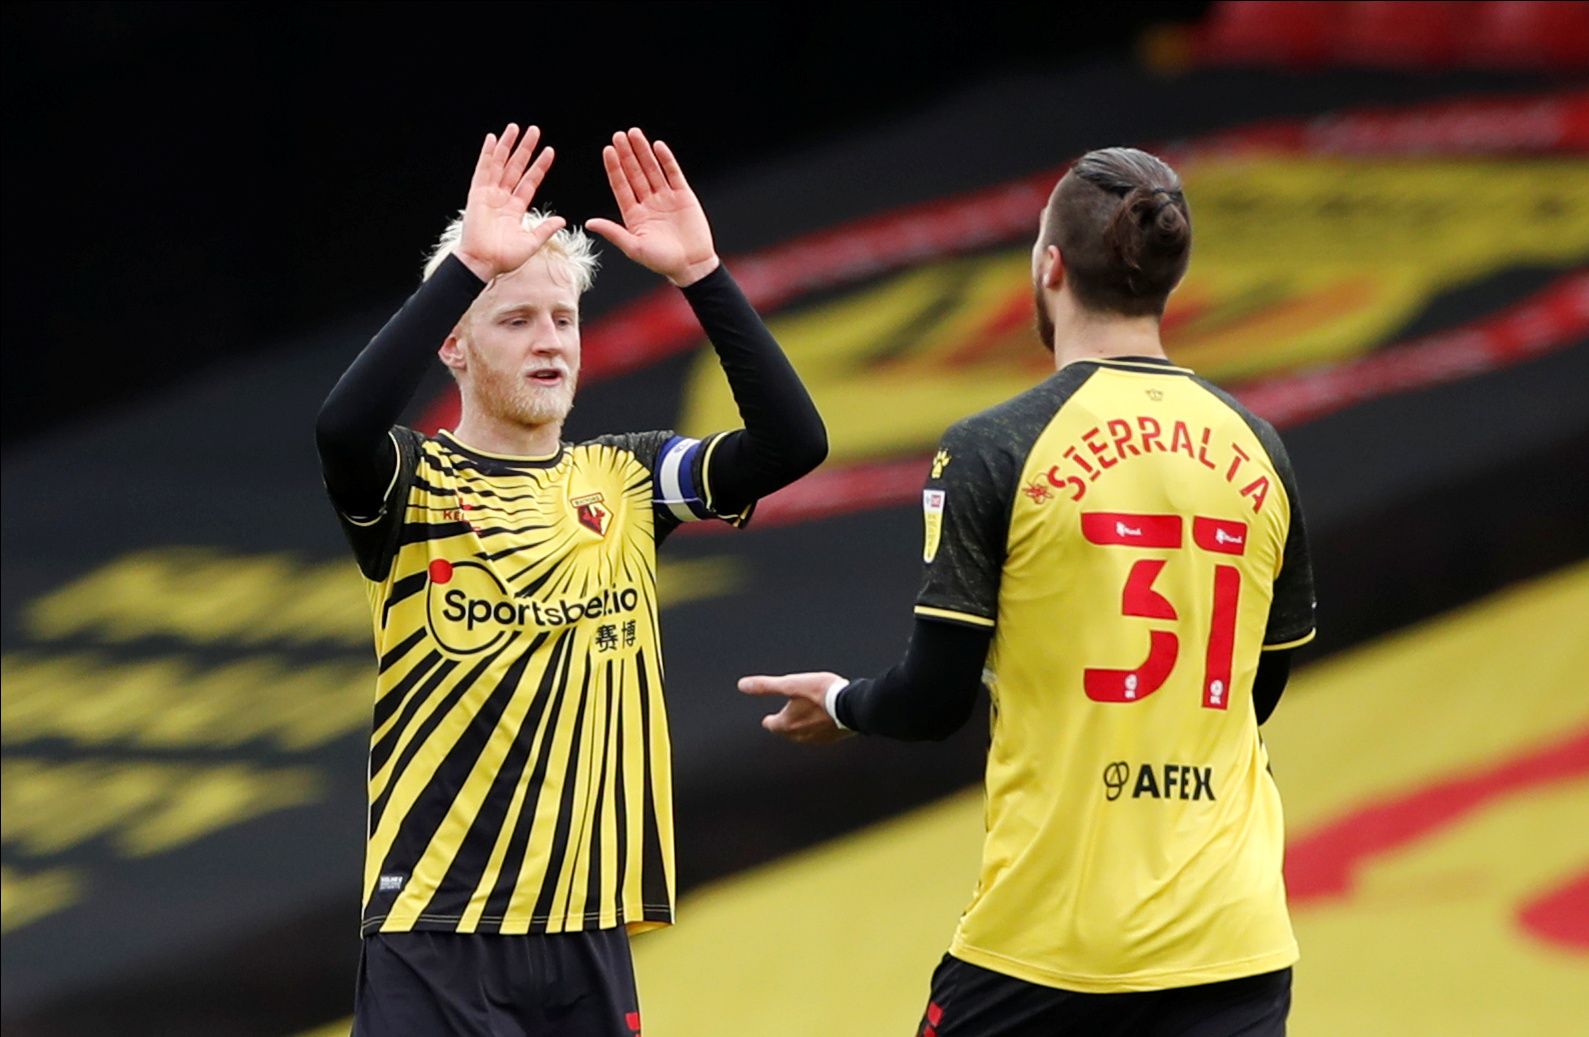 Soccer Football - Championship - Watford v Sheffield Wednesday - Vicarage Road, Watford, Britain - April 2, 2021  Watford's Will Hughes and Francisco Sierralta celebrate after the match   Action Images/Paul Childs  EDITORIAL USE ONLY. No use with unauthorized audio, video, data, fixture lists, club/league logos or 